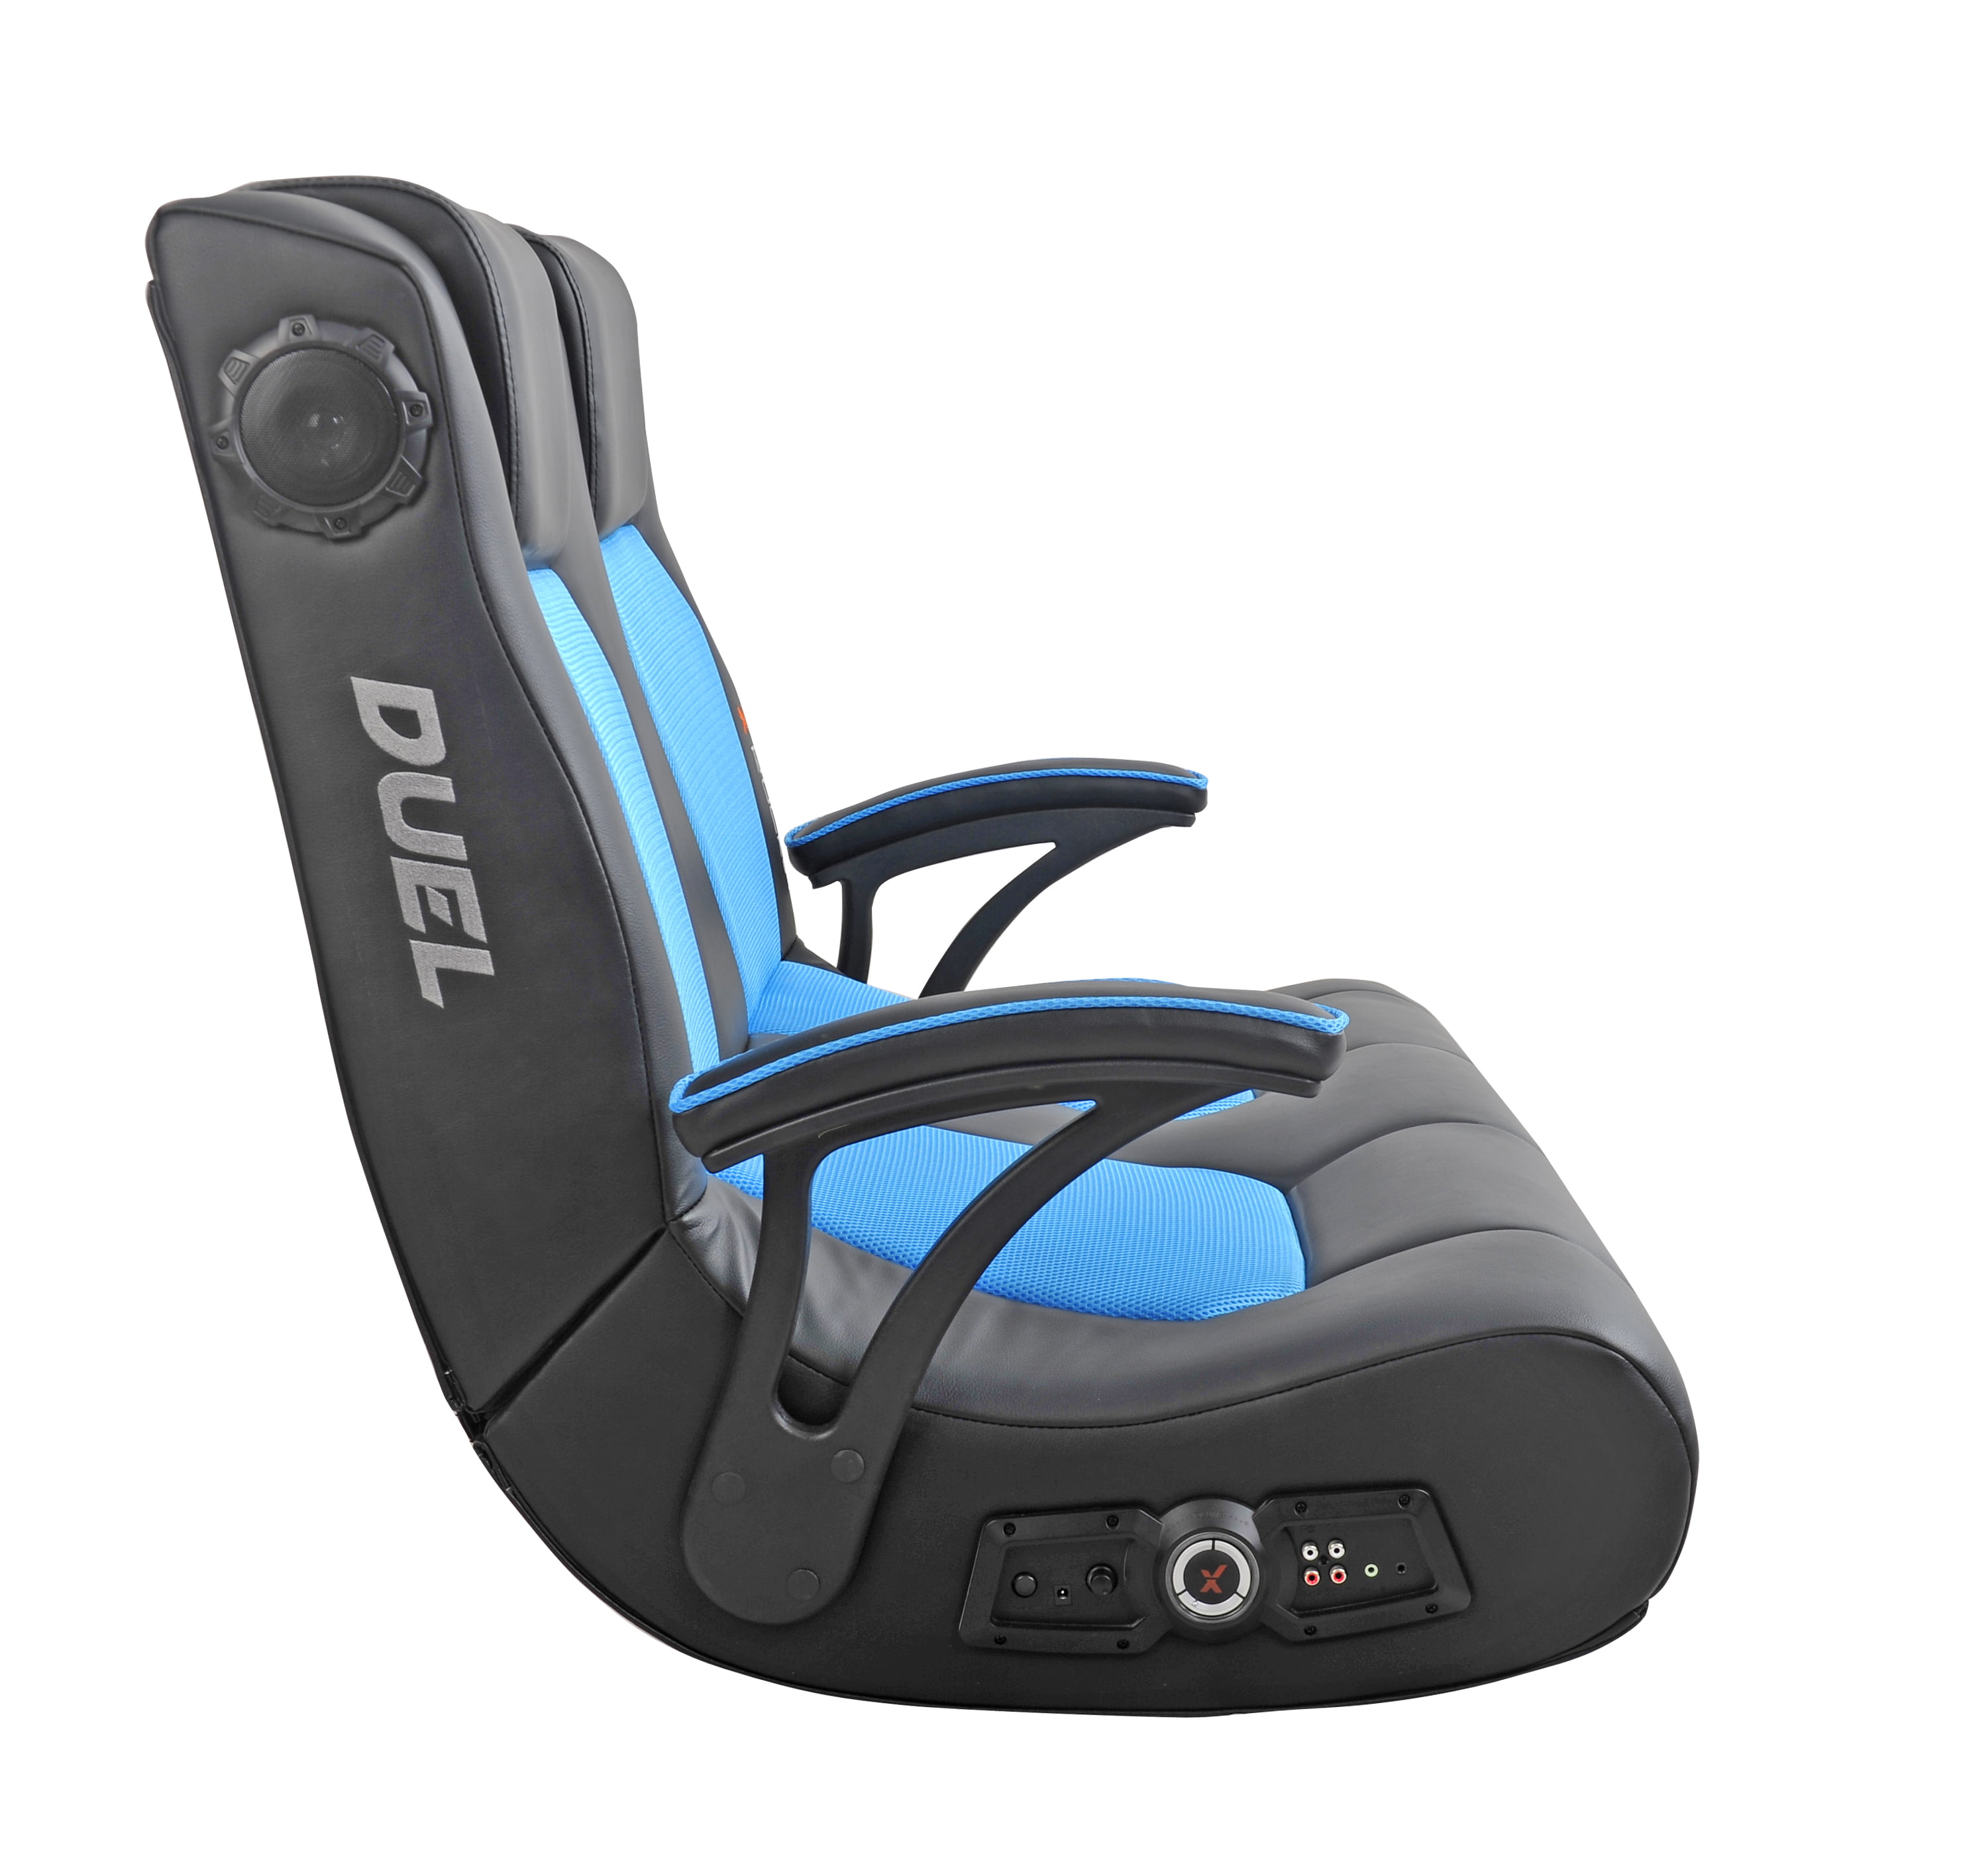  Gaming Chair Black Friday Sale for Small Space